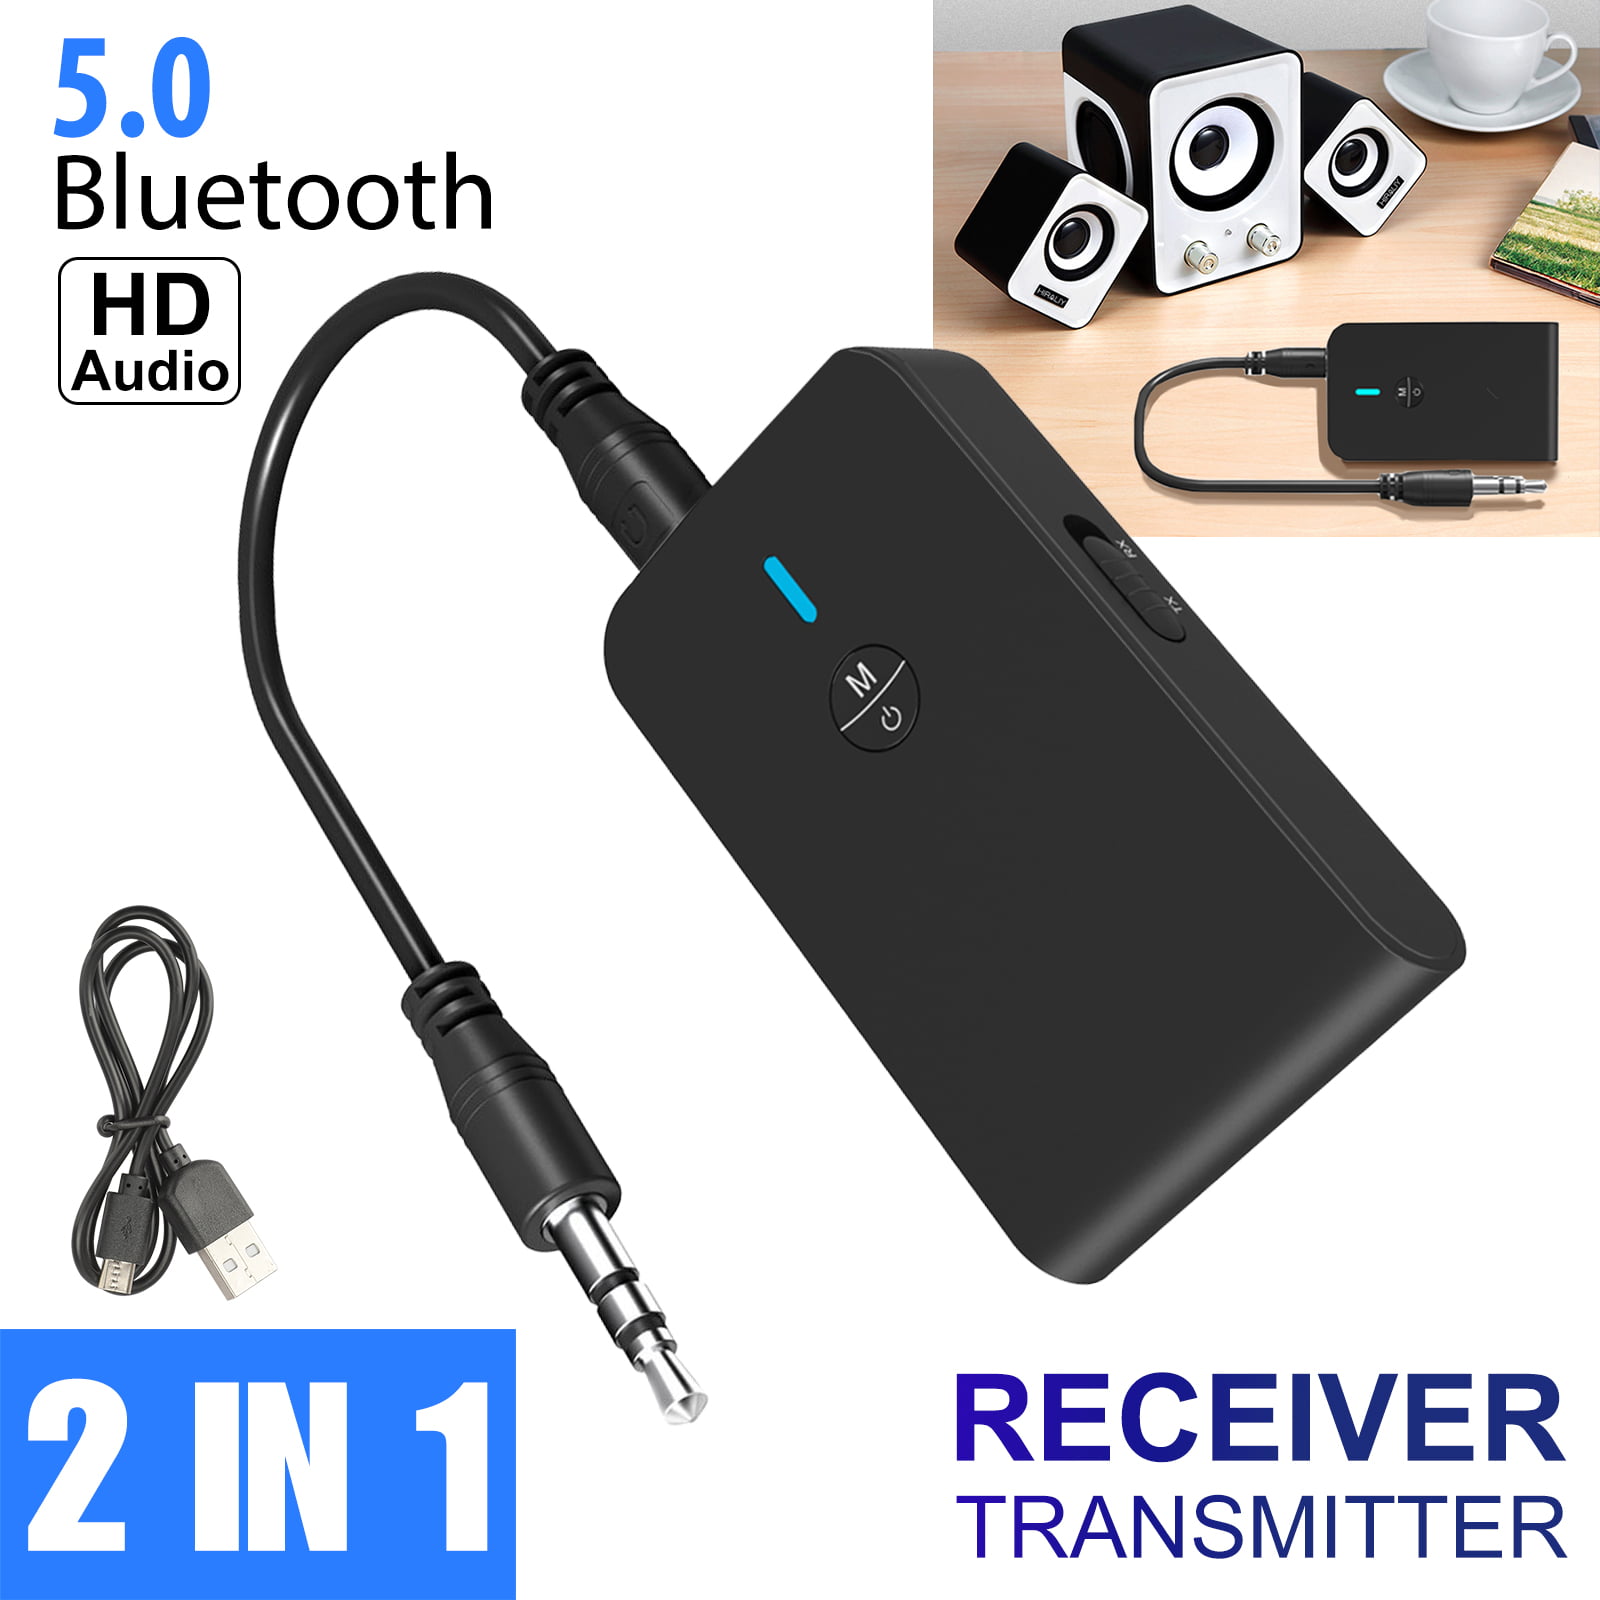 Car Earphones and More Home Stereo System Bluetooth Headsets Transmitter /& Receiver Dual Function aptX Low Latency Bluetooth 5.0 Transmitter//Receiver with micphone,2-in-1 Bluetooth Wireless Audio Adapter Works for TV